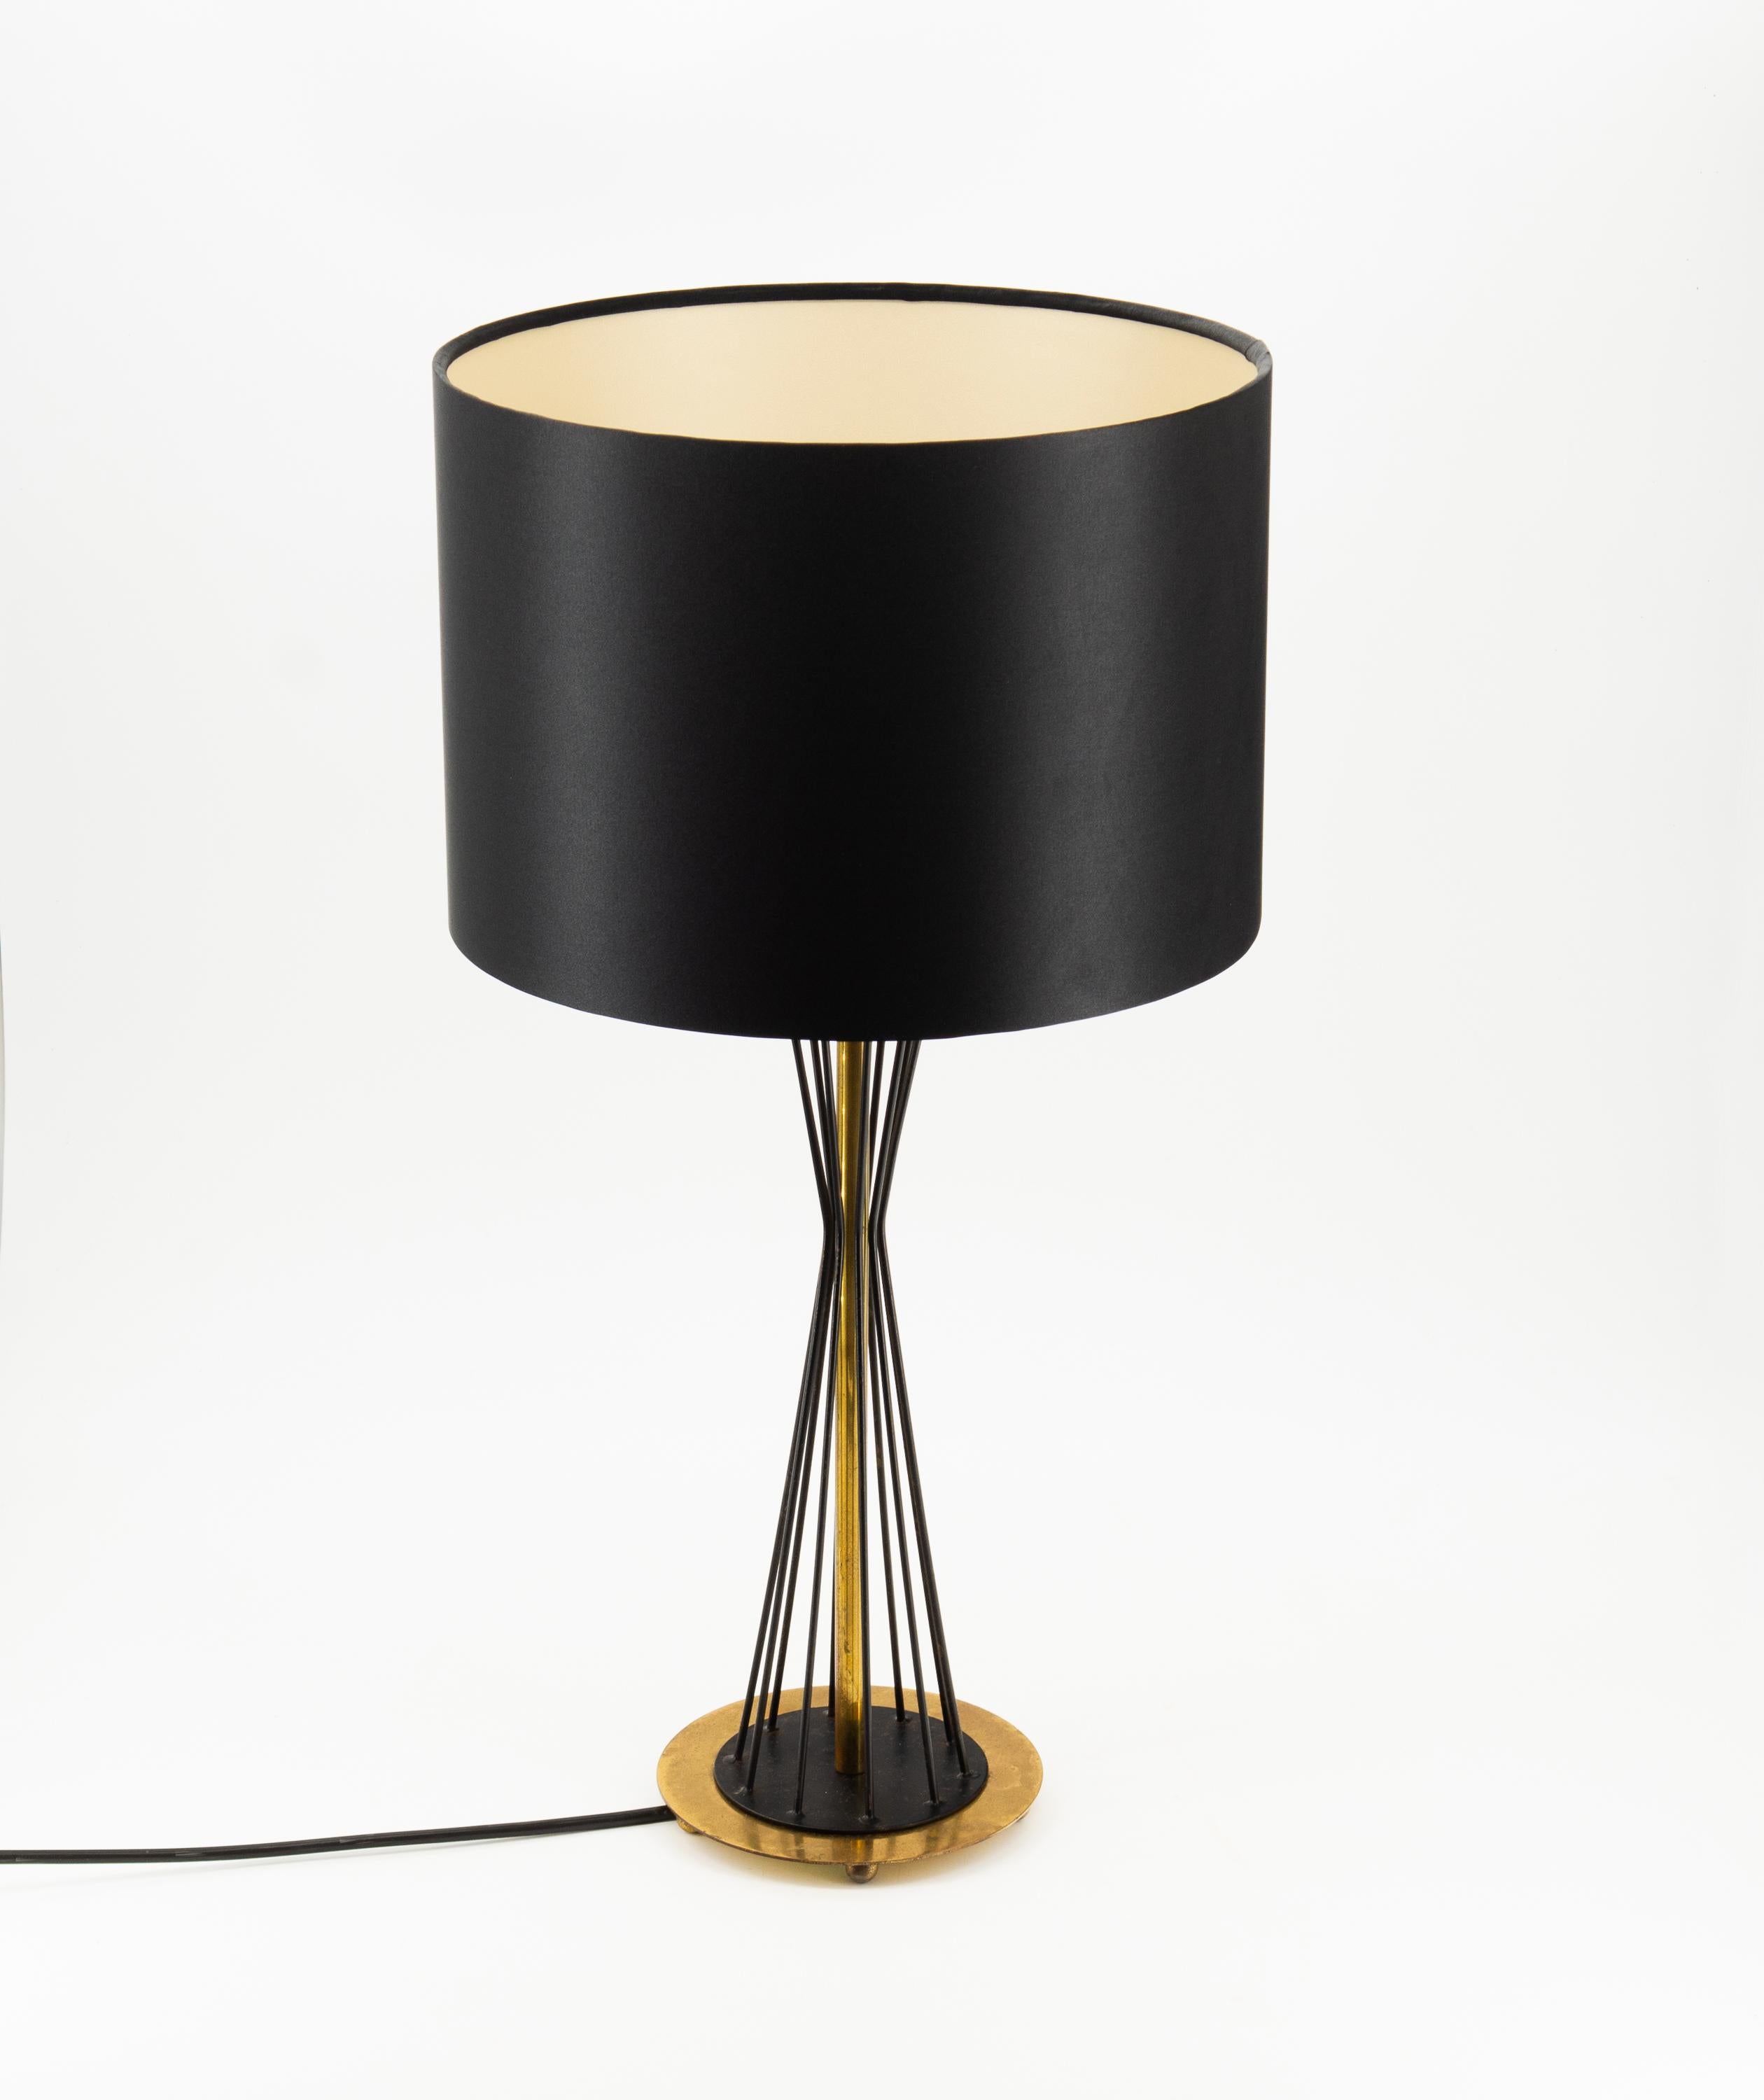 Pair mid century black & brass diablo table lamps. Italian. Circa 1950.

Delivery included to the UK.

The lamp bases have a diablo shaped black metal column with brass circular bases on four ball feet. They are in original untouched condition,